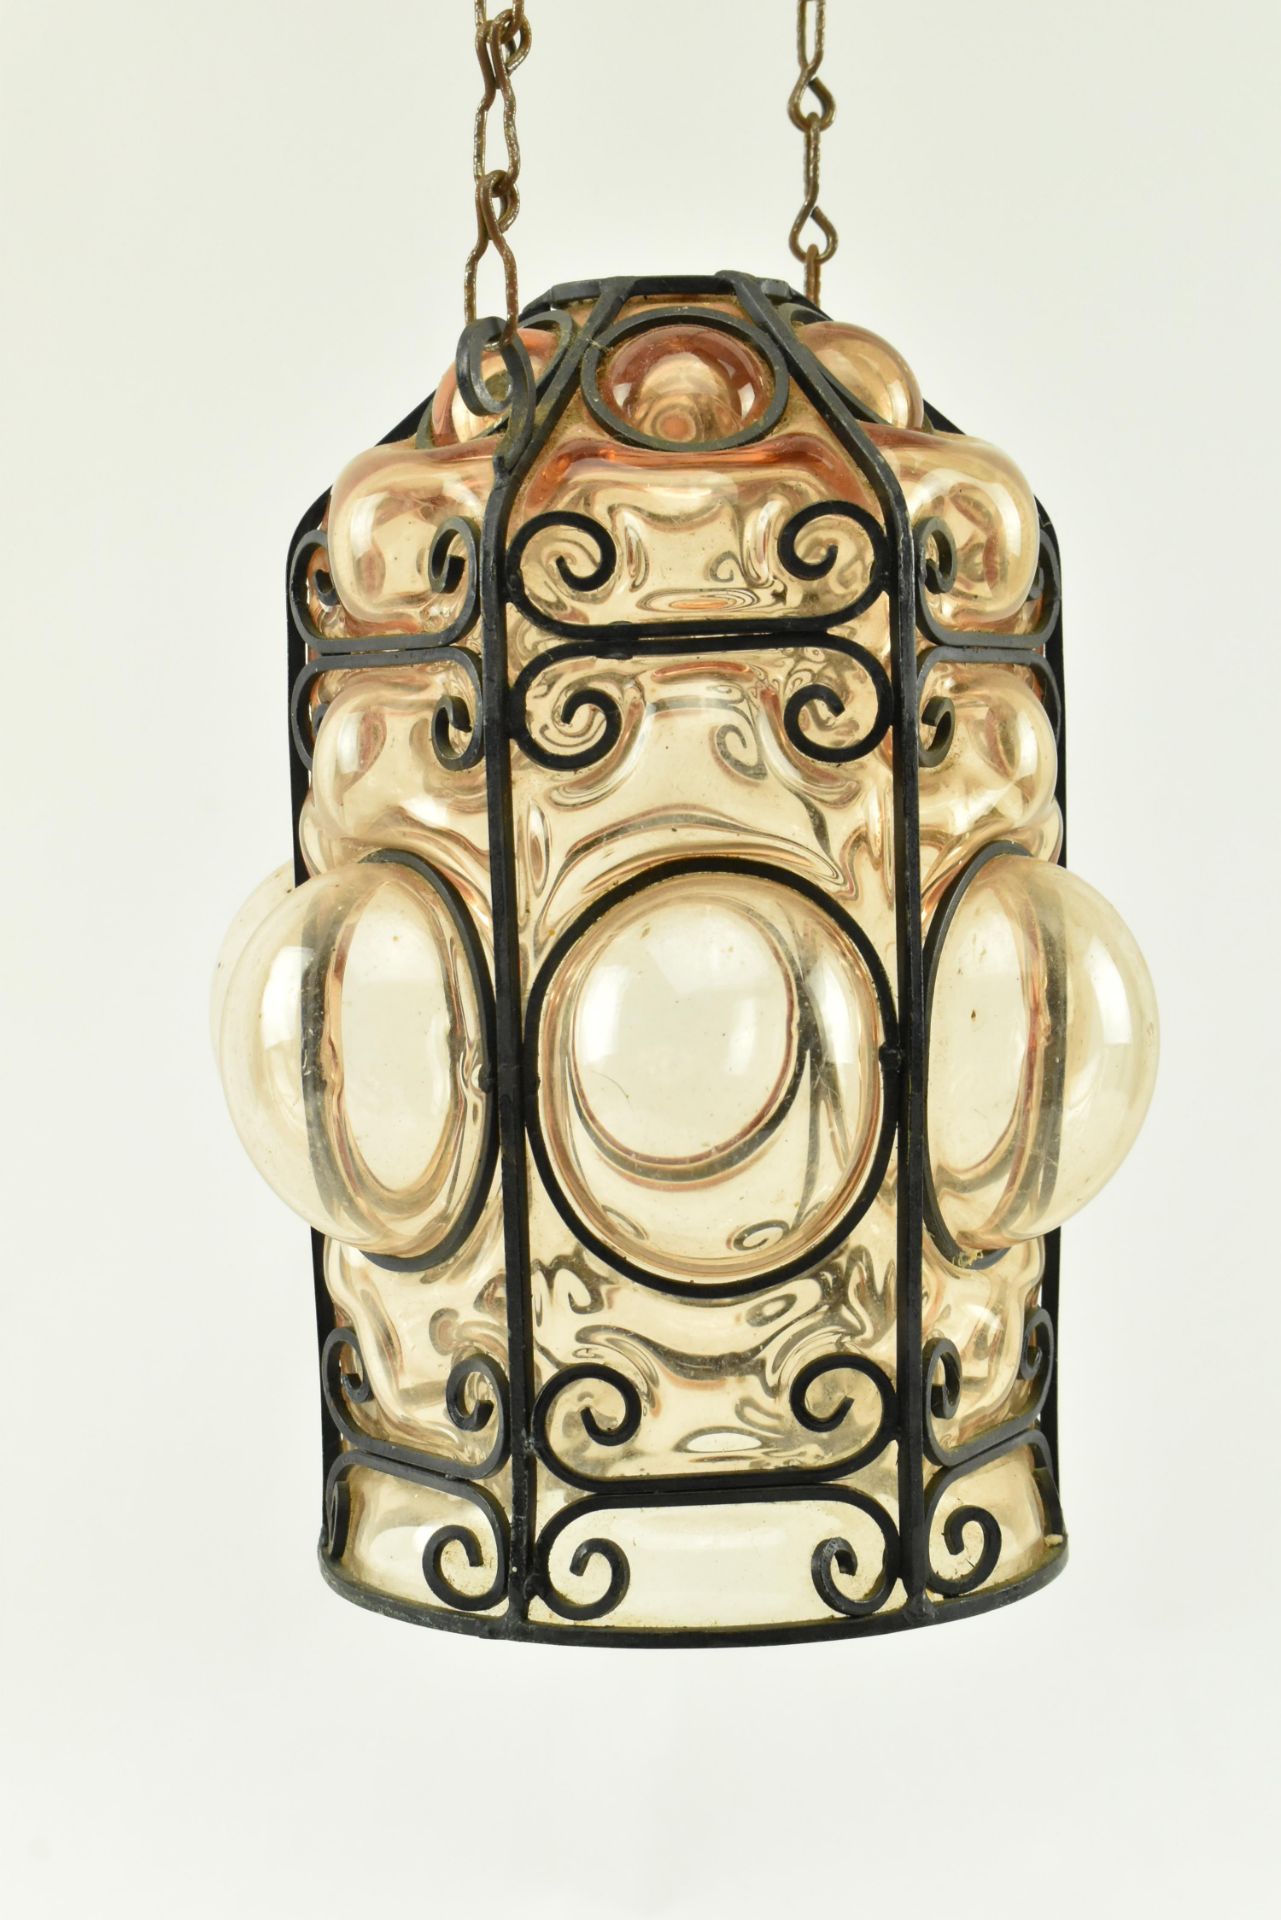 EARLY 20TH CENTURY FRENCH BLOWN GLASS PORCH LANTERN - Image 2 of 6